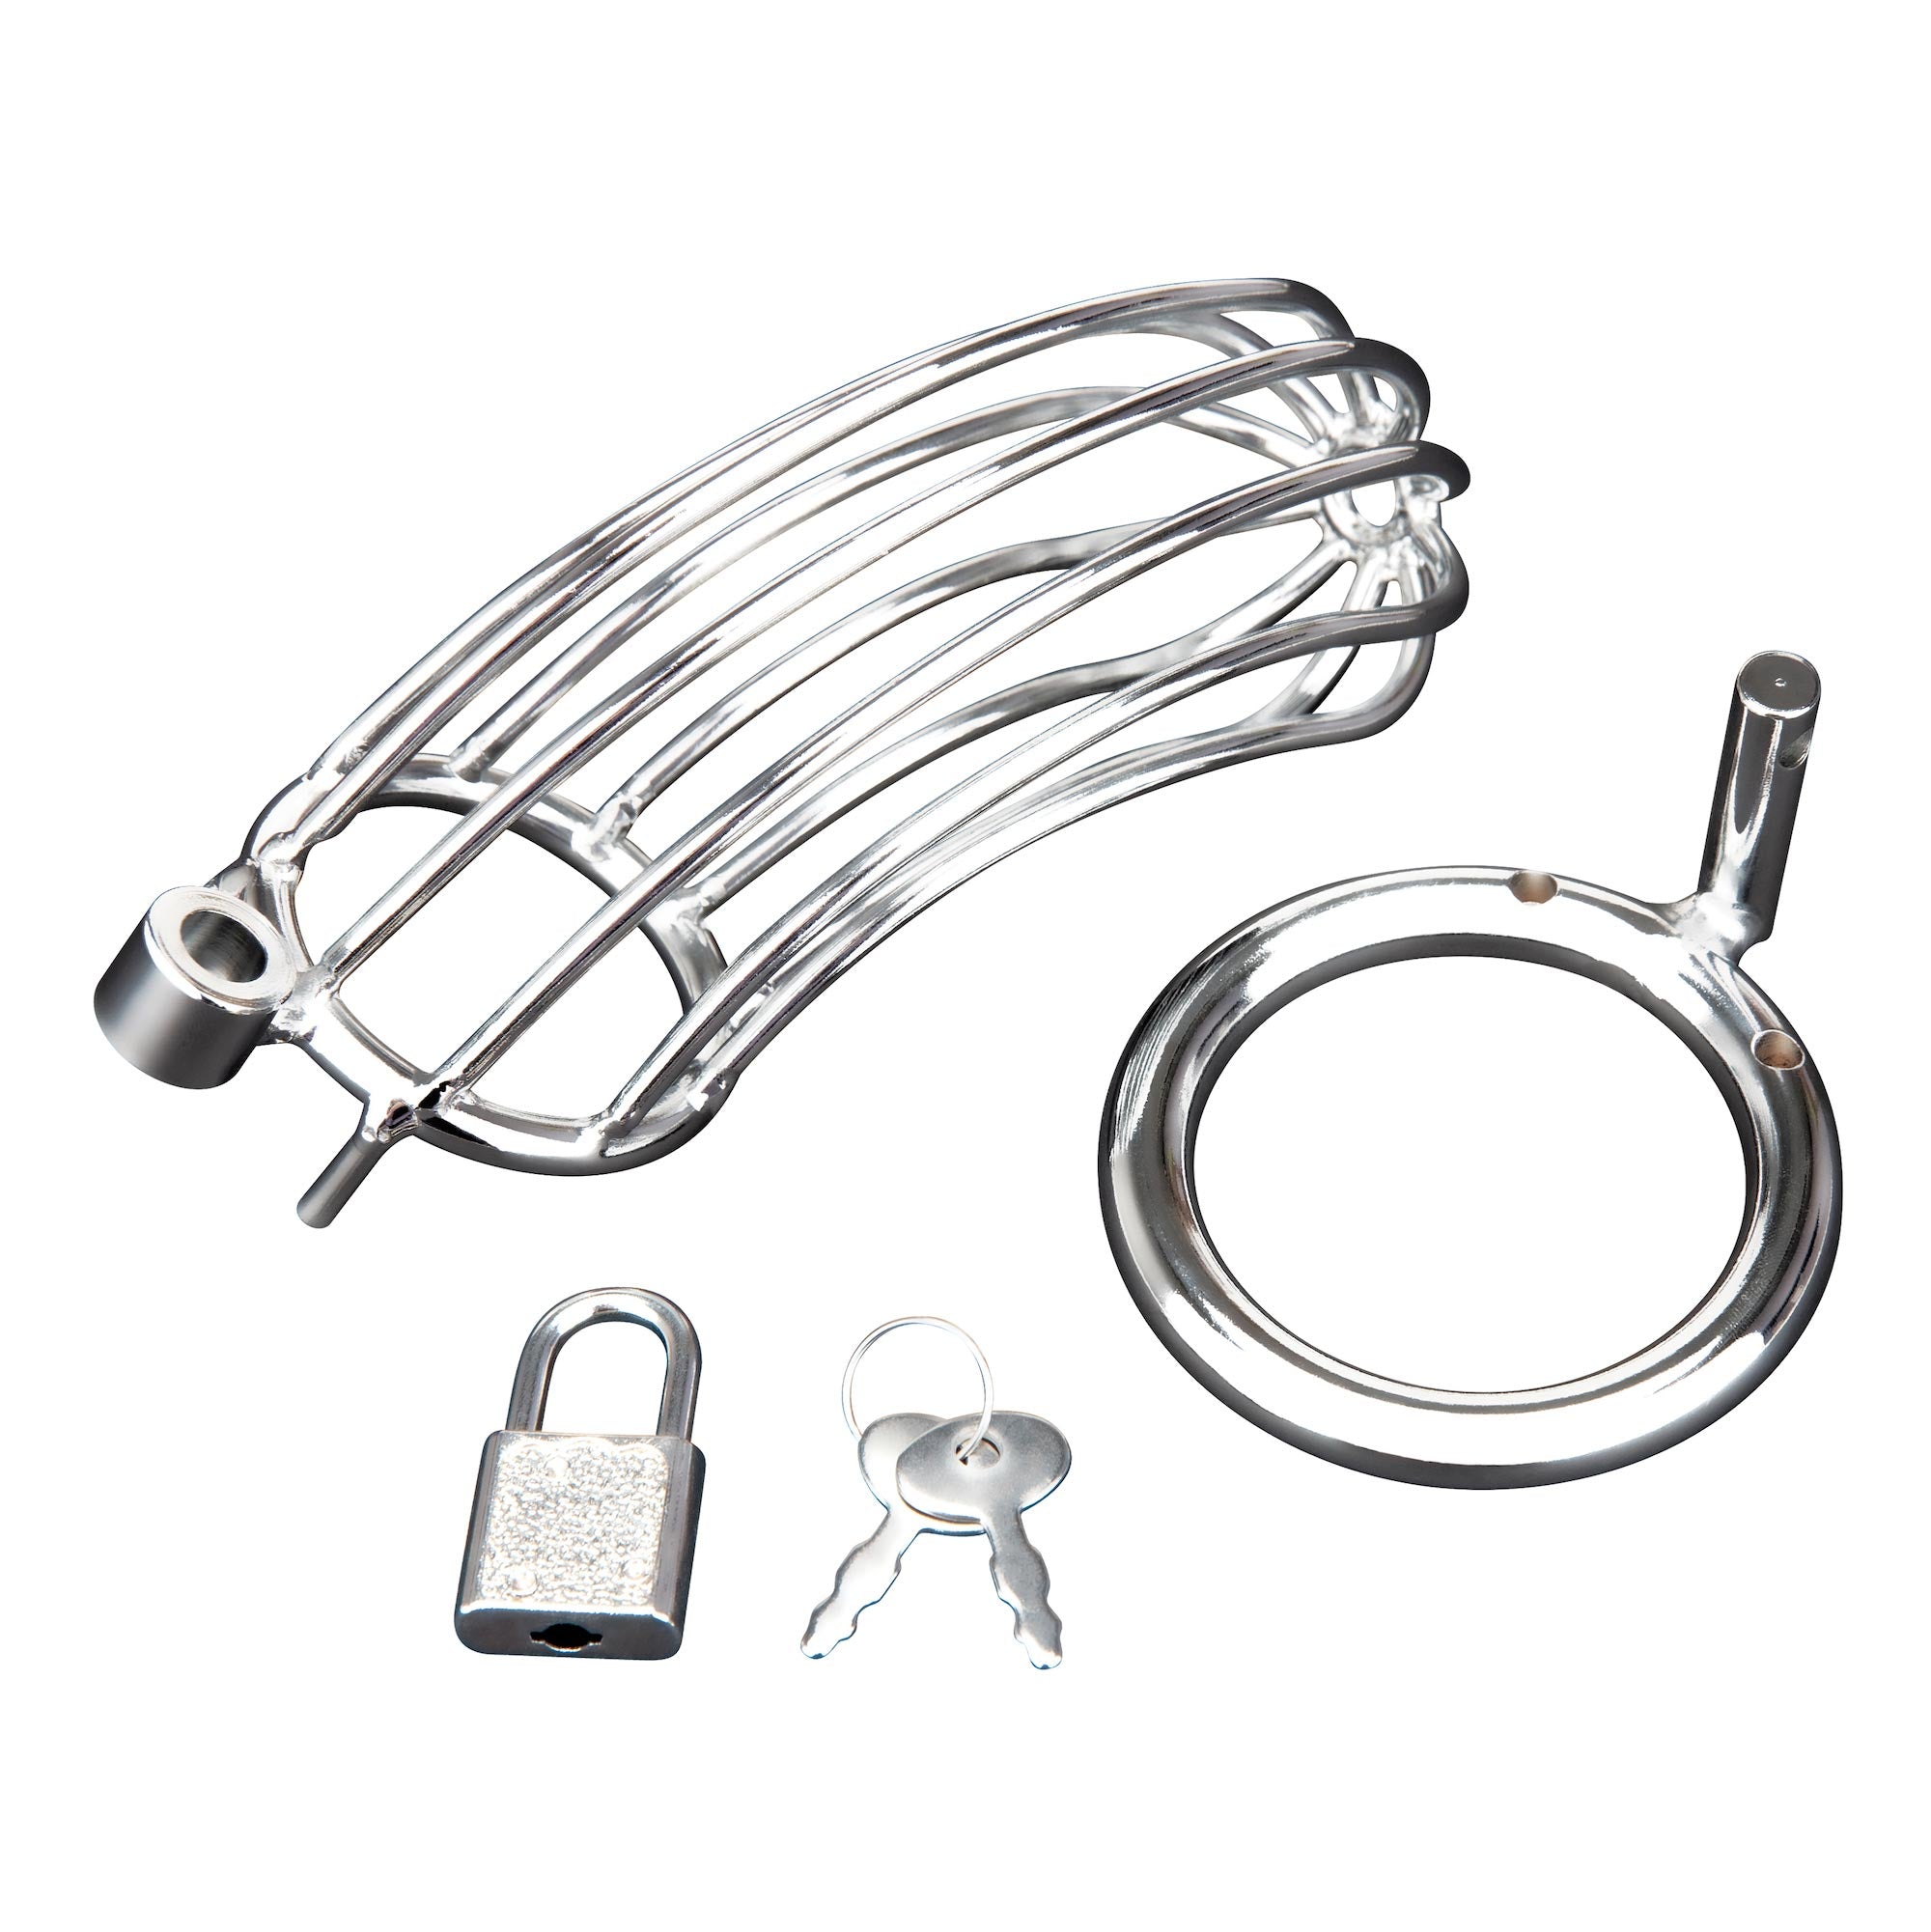 Blue Line Men Prisoner Chastity Cock Cage with Lock (Stainless Steel) at glastoy.com